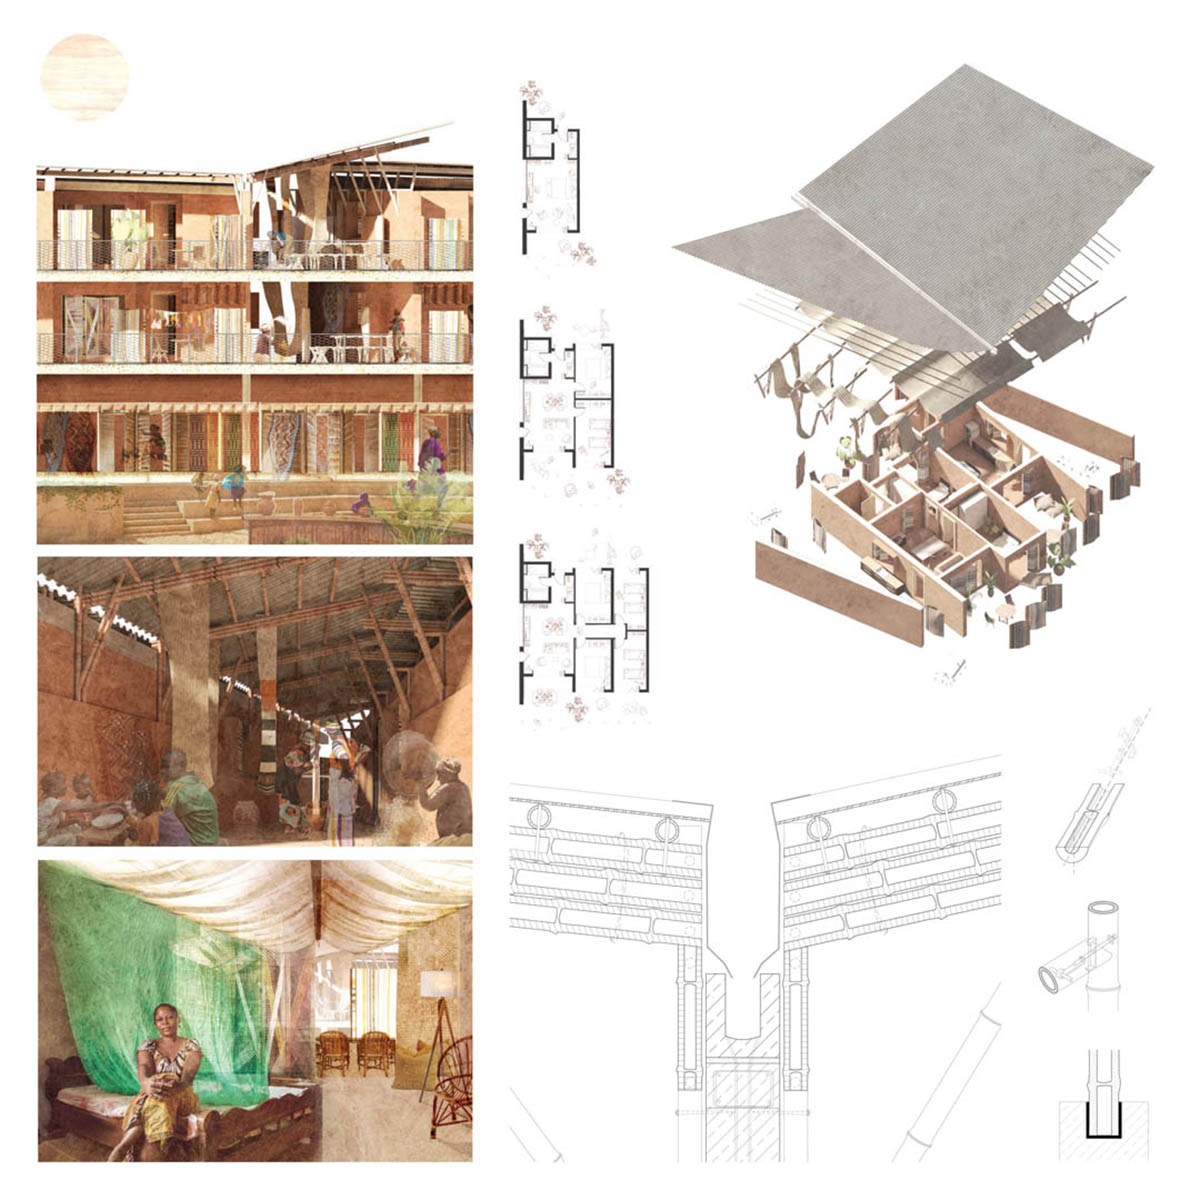 vernacular architecture thesis topics